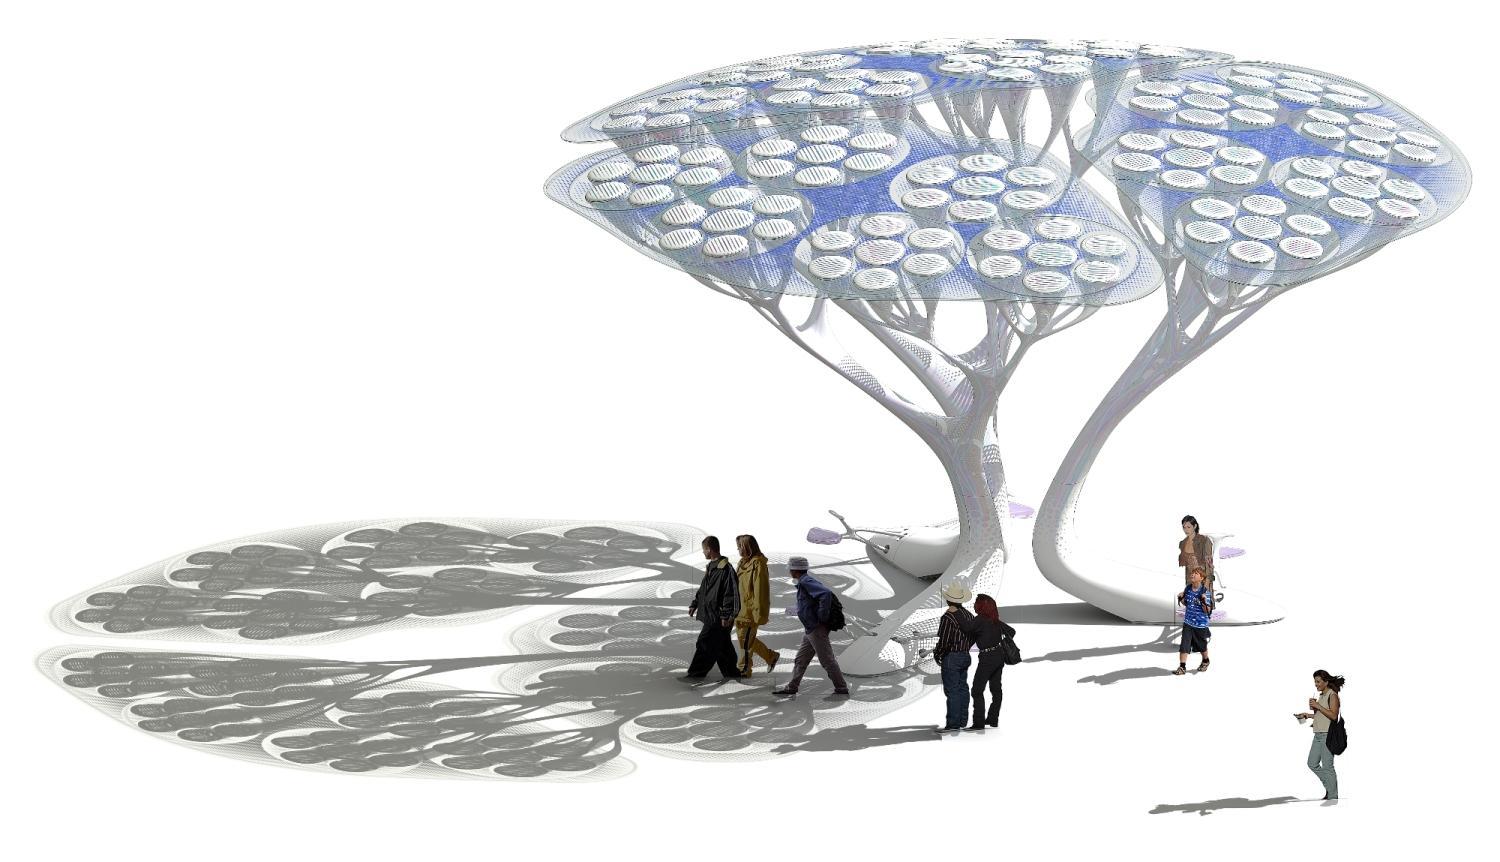 The Treepods concept (above) is one of various carbon-capture technologies that act like artificial trees, sucking CO2 from the air through their canopies.